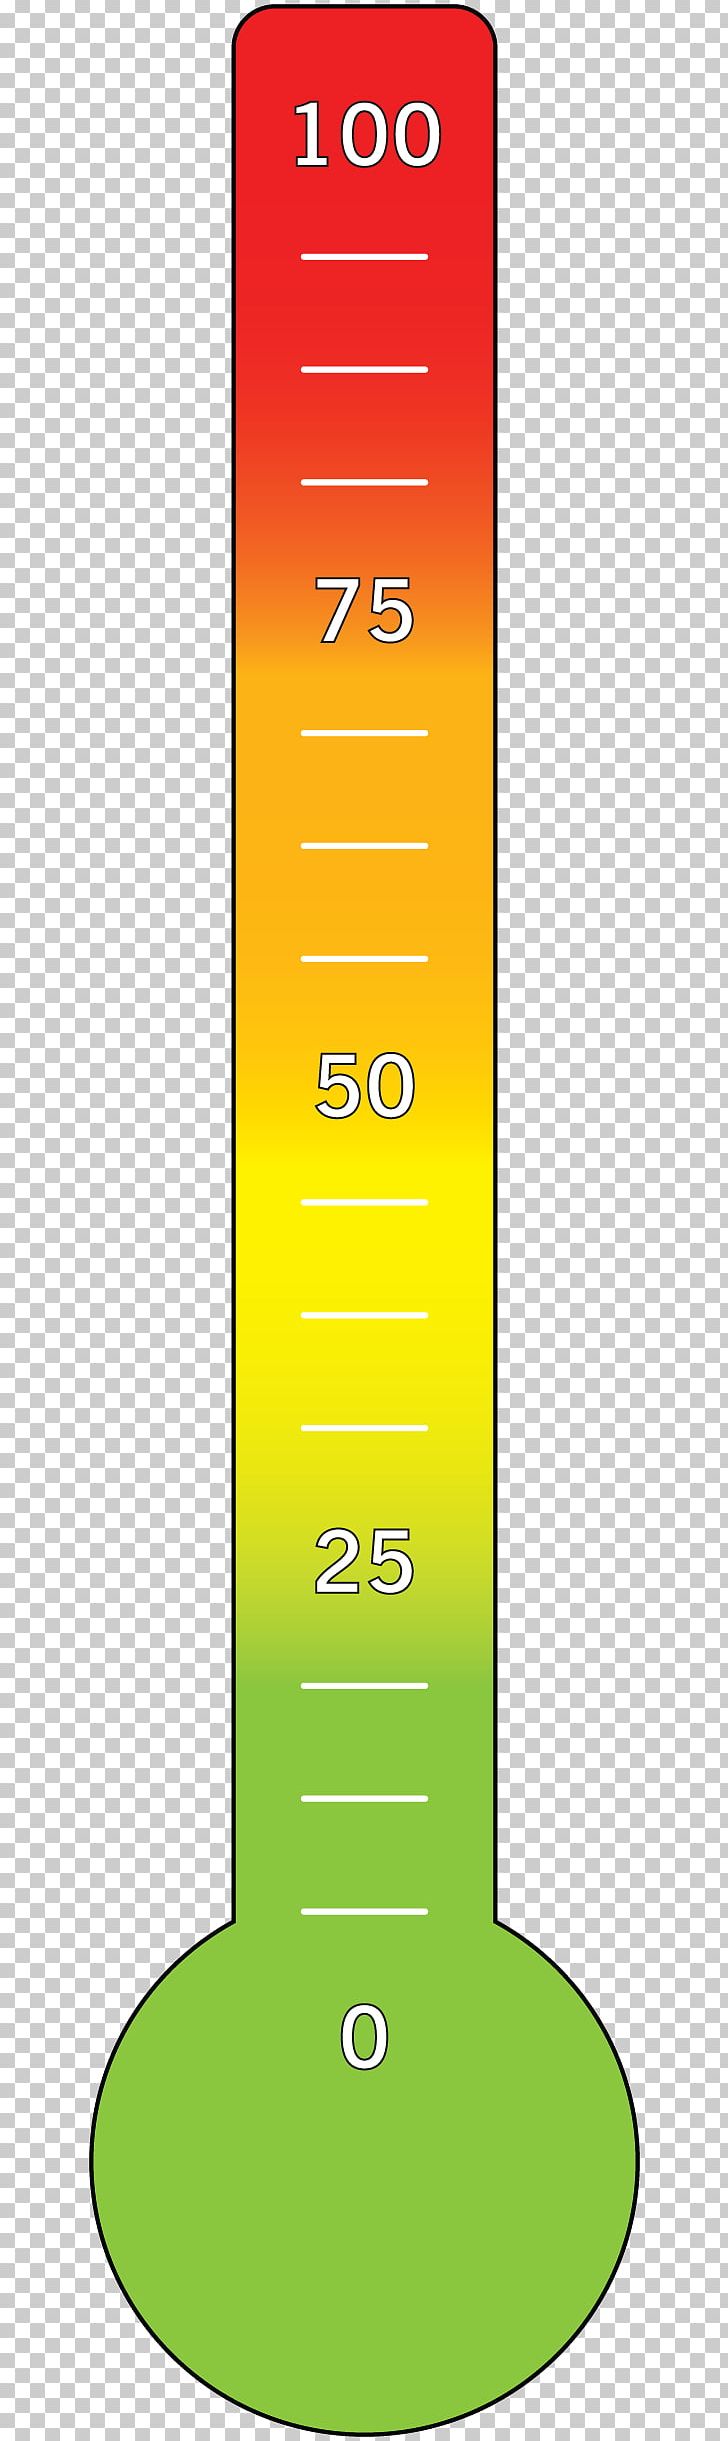 Mercury-in-glass Thermometer Barometer Atmospheric Thermometer PNG, Clipart, Angle, Area, Atmospheric, Atmospheric Thermometer, Barometer Free PNG Download